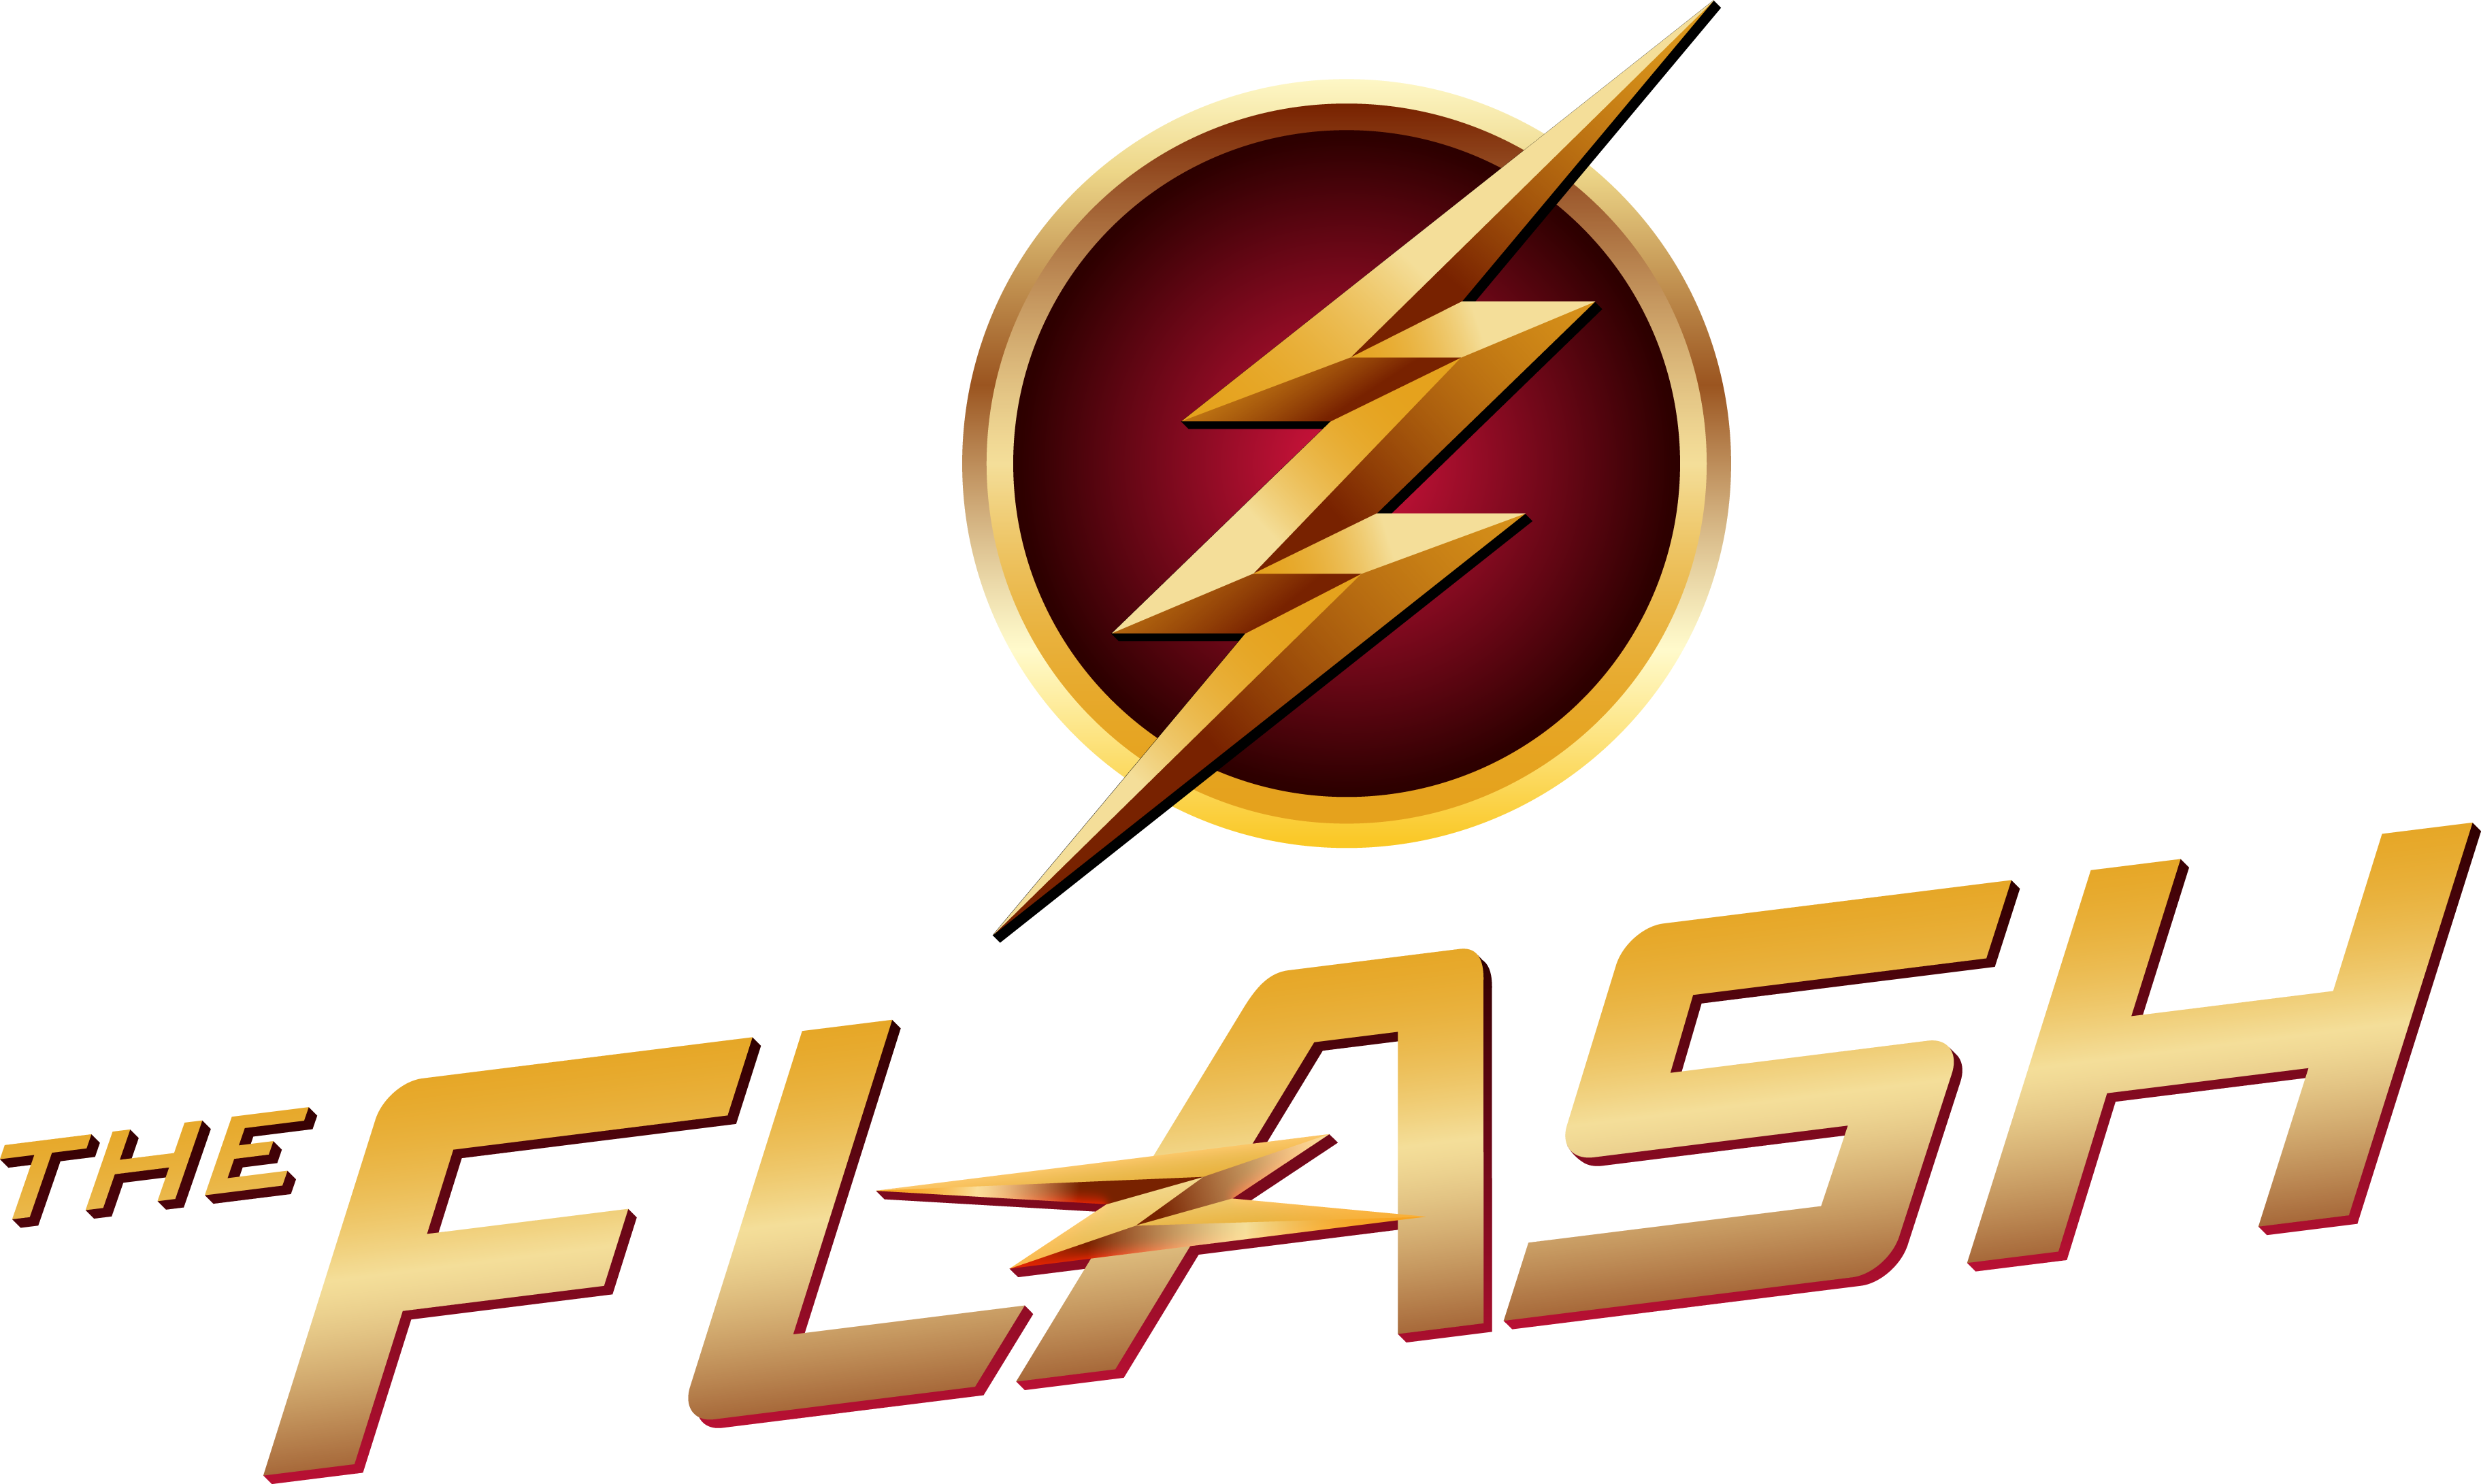 A Logo With A Lightning Bolt In A Circle